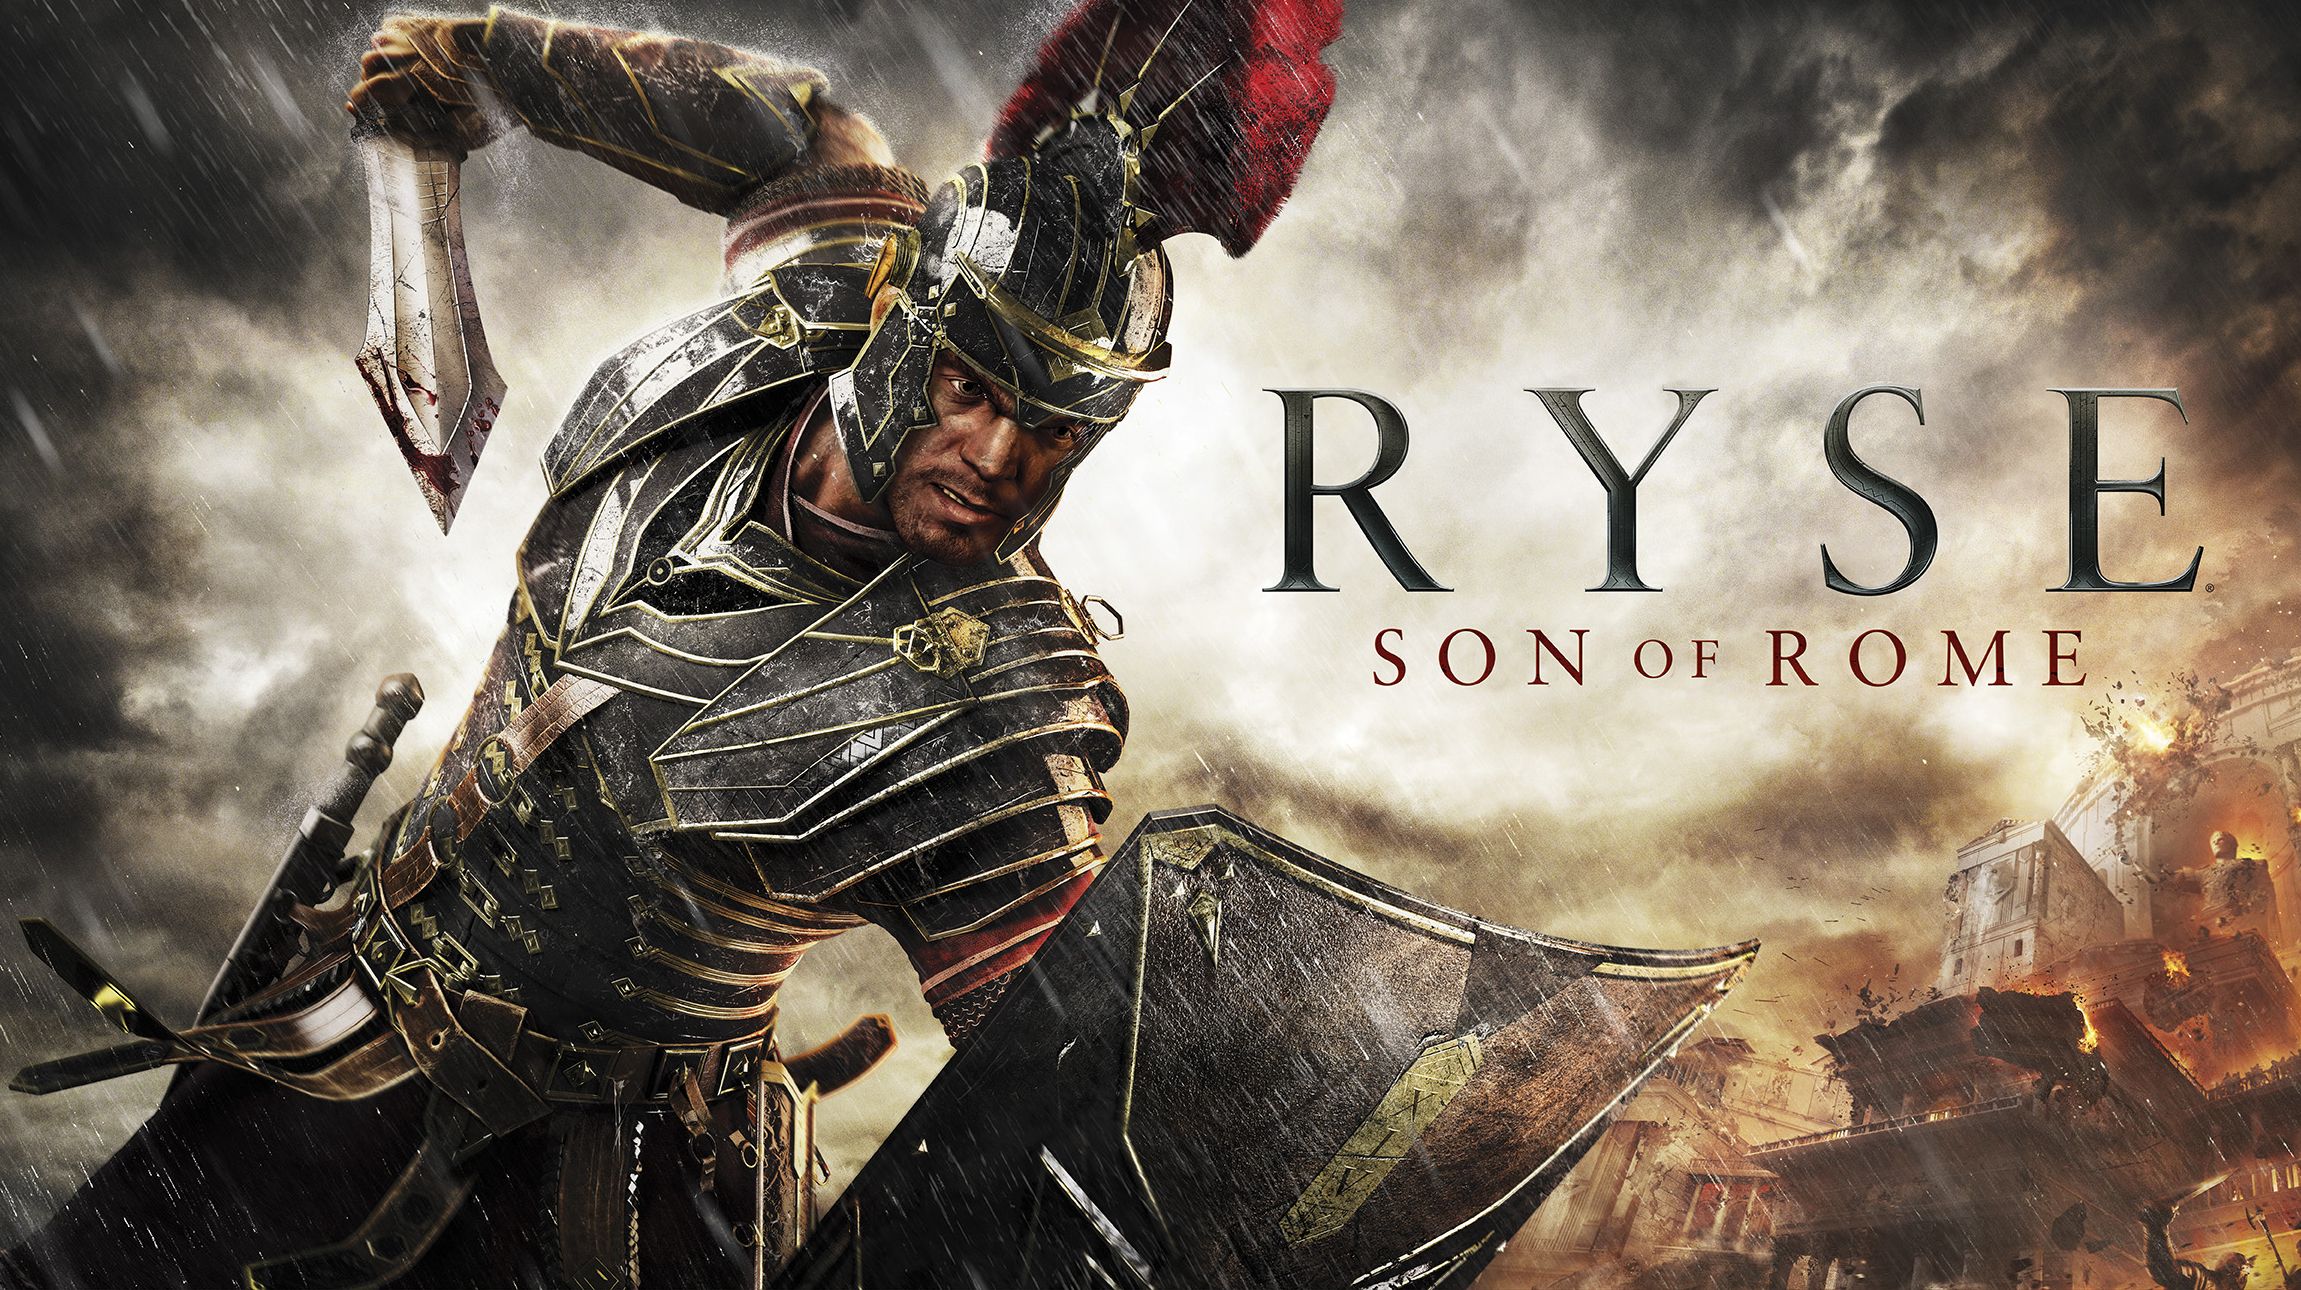 Ryse Son Of Rome Story And Damocles Trailers Focuses On Tales